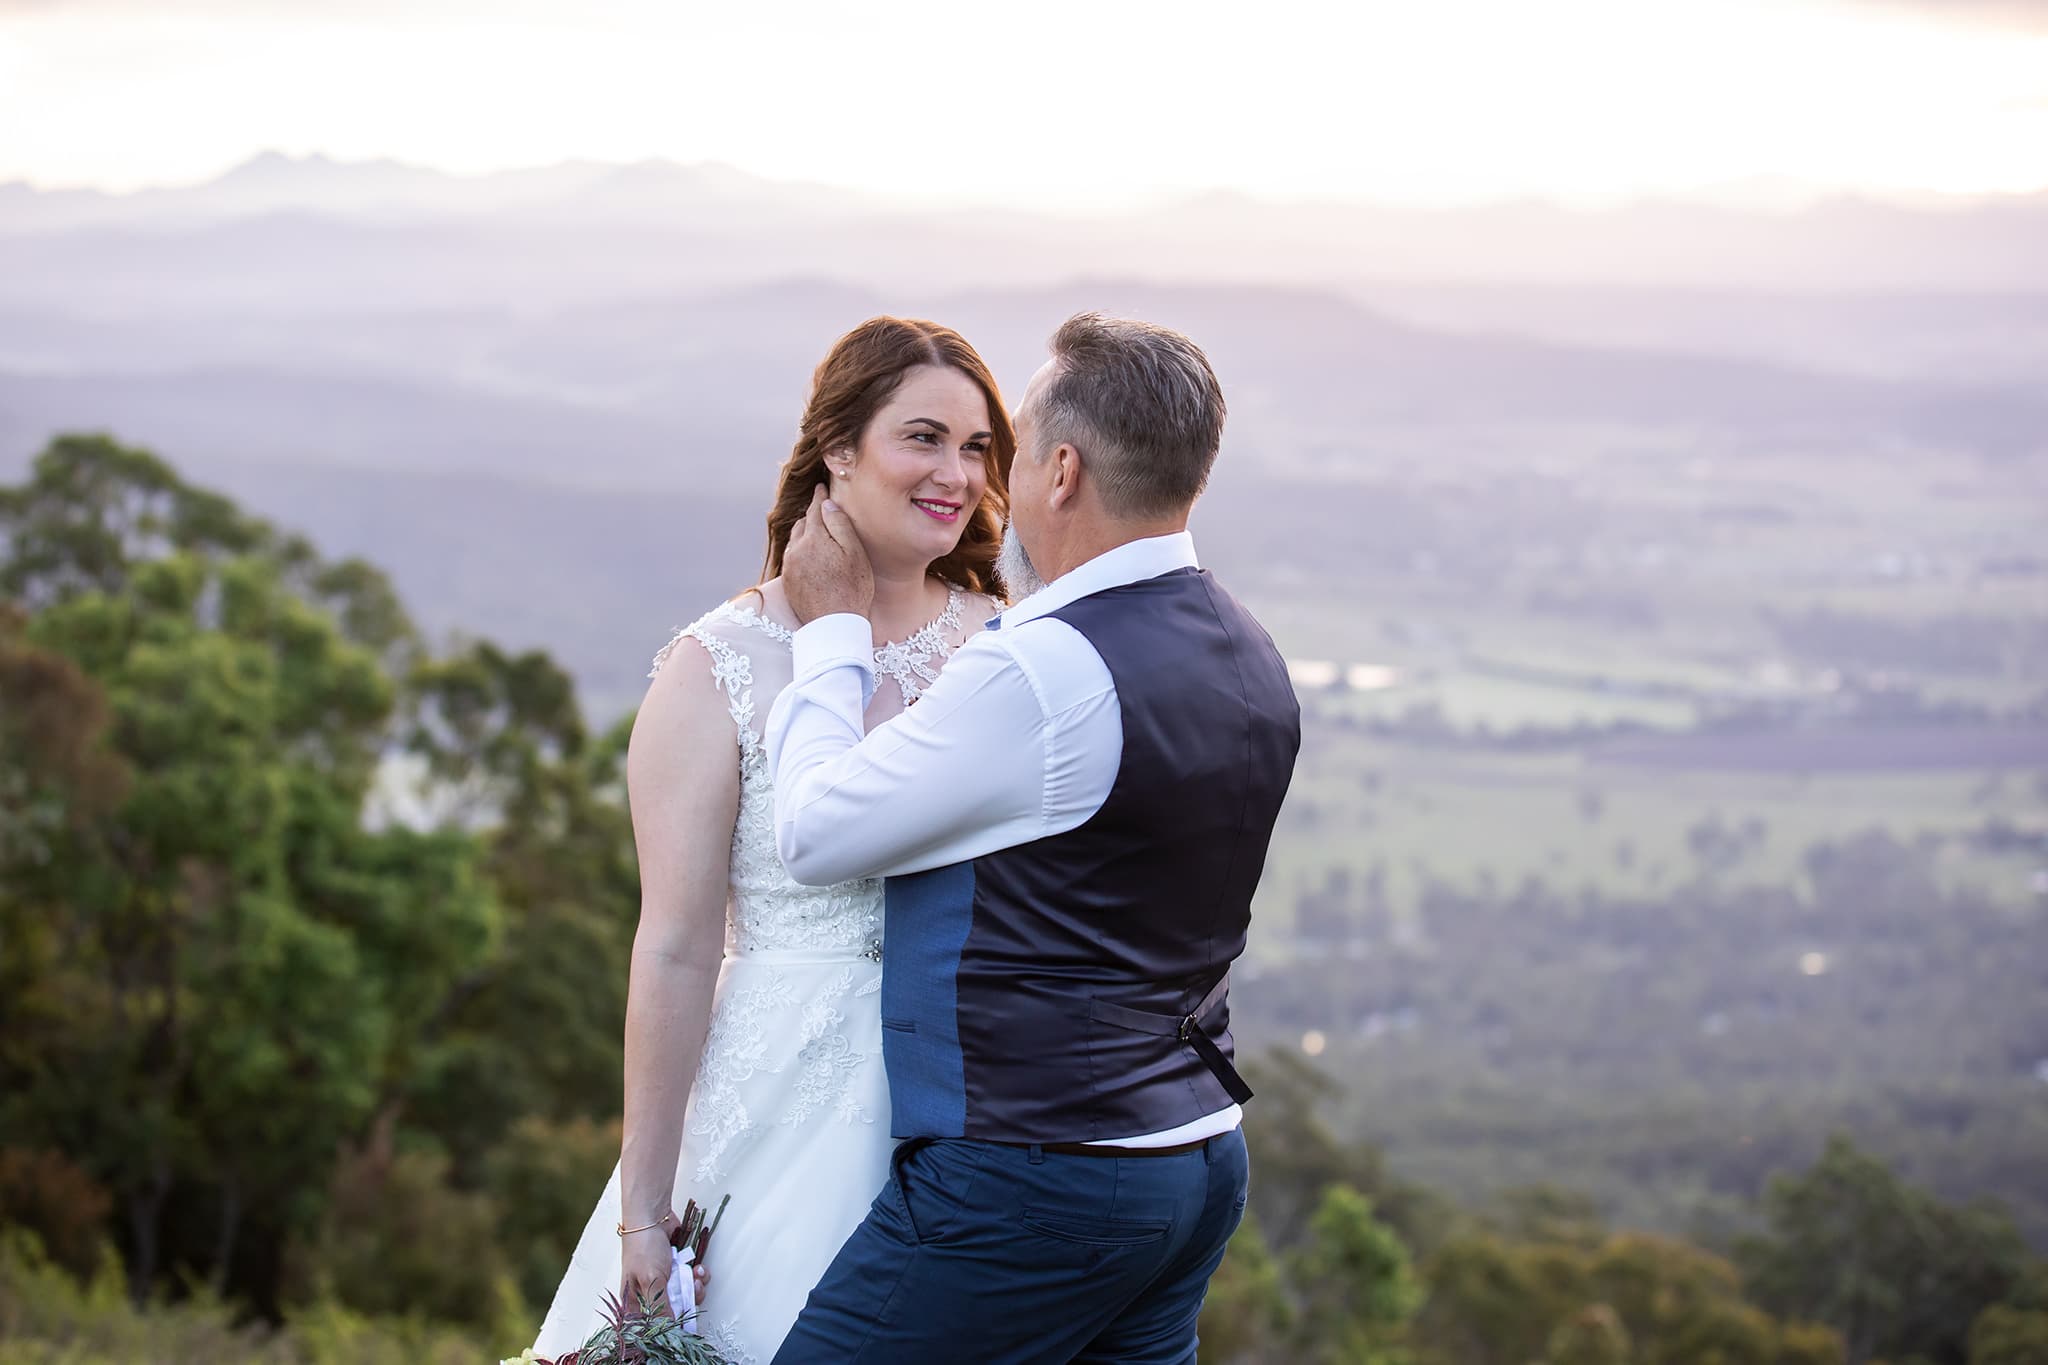 Bride and groom by Gold Coast wedding photographer, Bec Pattinson Photography.